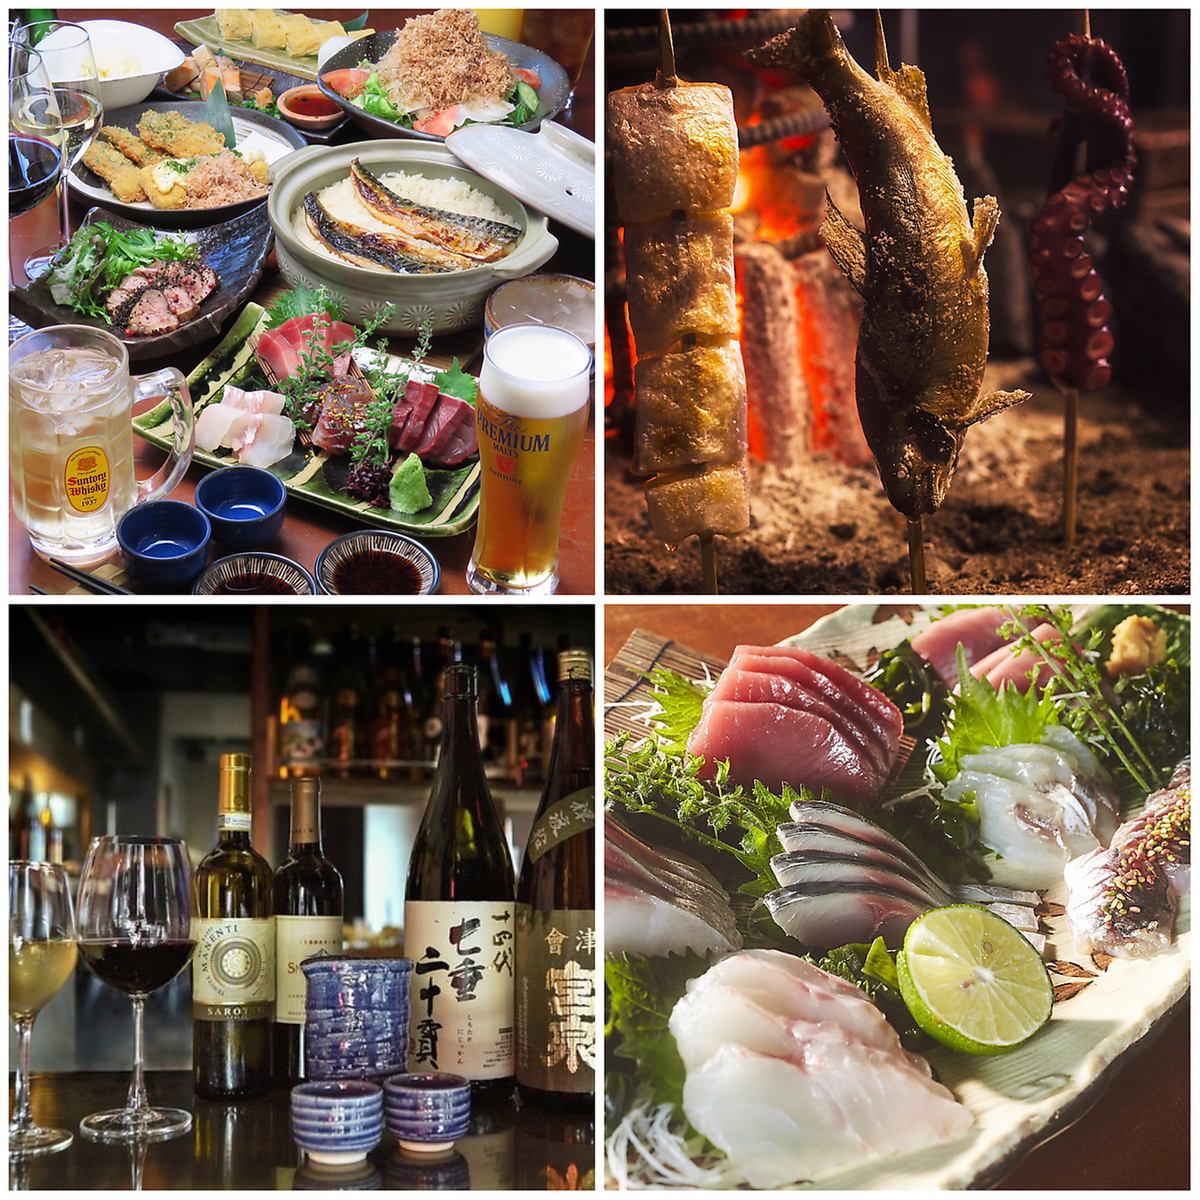 You can enjoy wine and Japanese sake that go perfectly with our fresh fish!